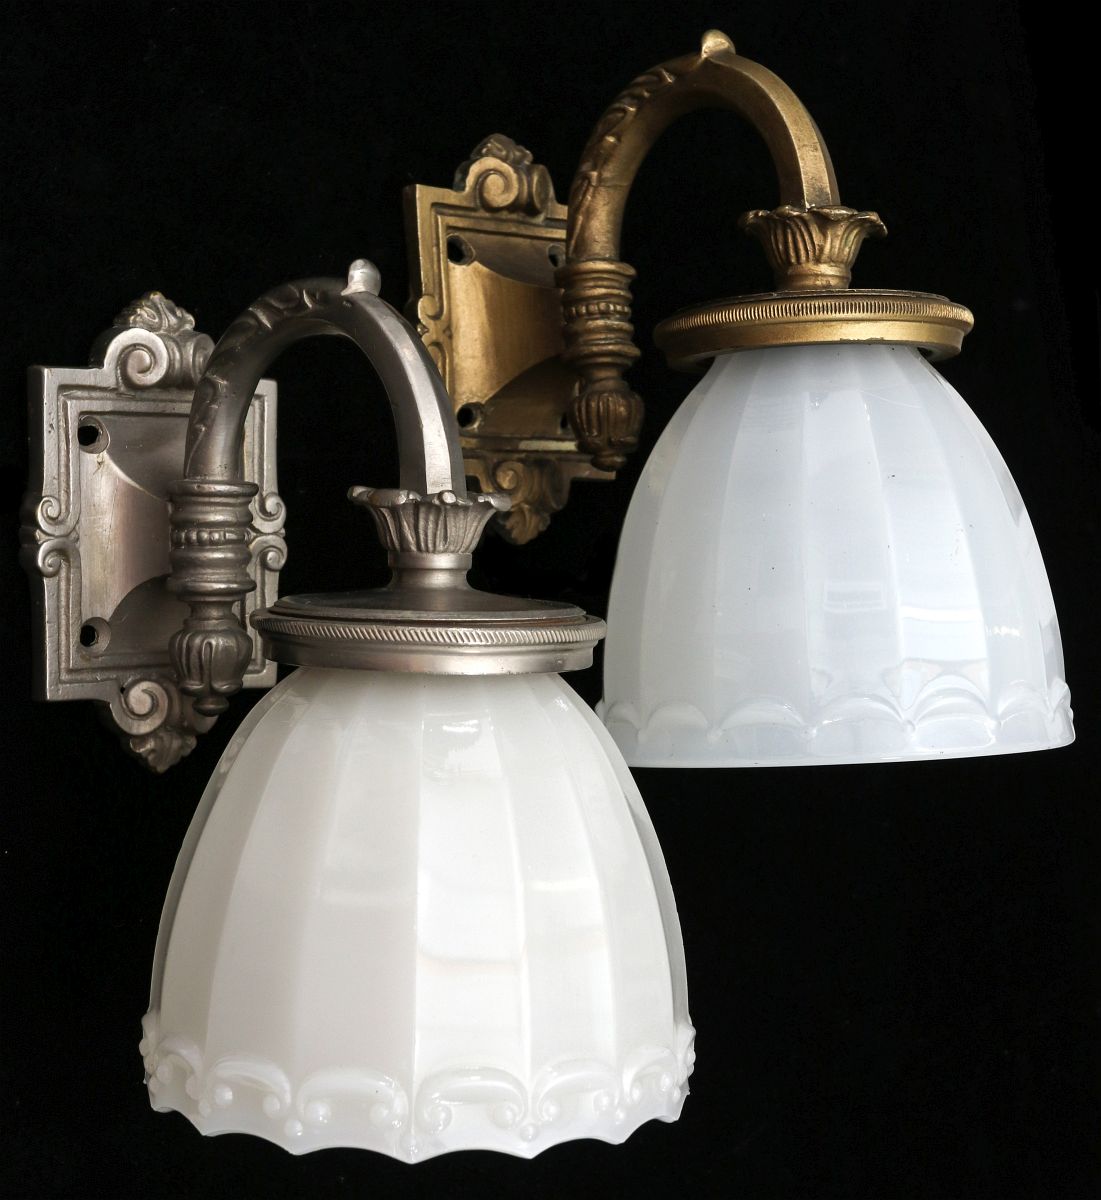 TWO PULLMAN COMPANY RAILCAR SIDE LAMPS